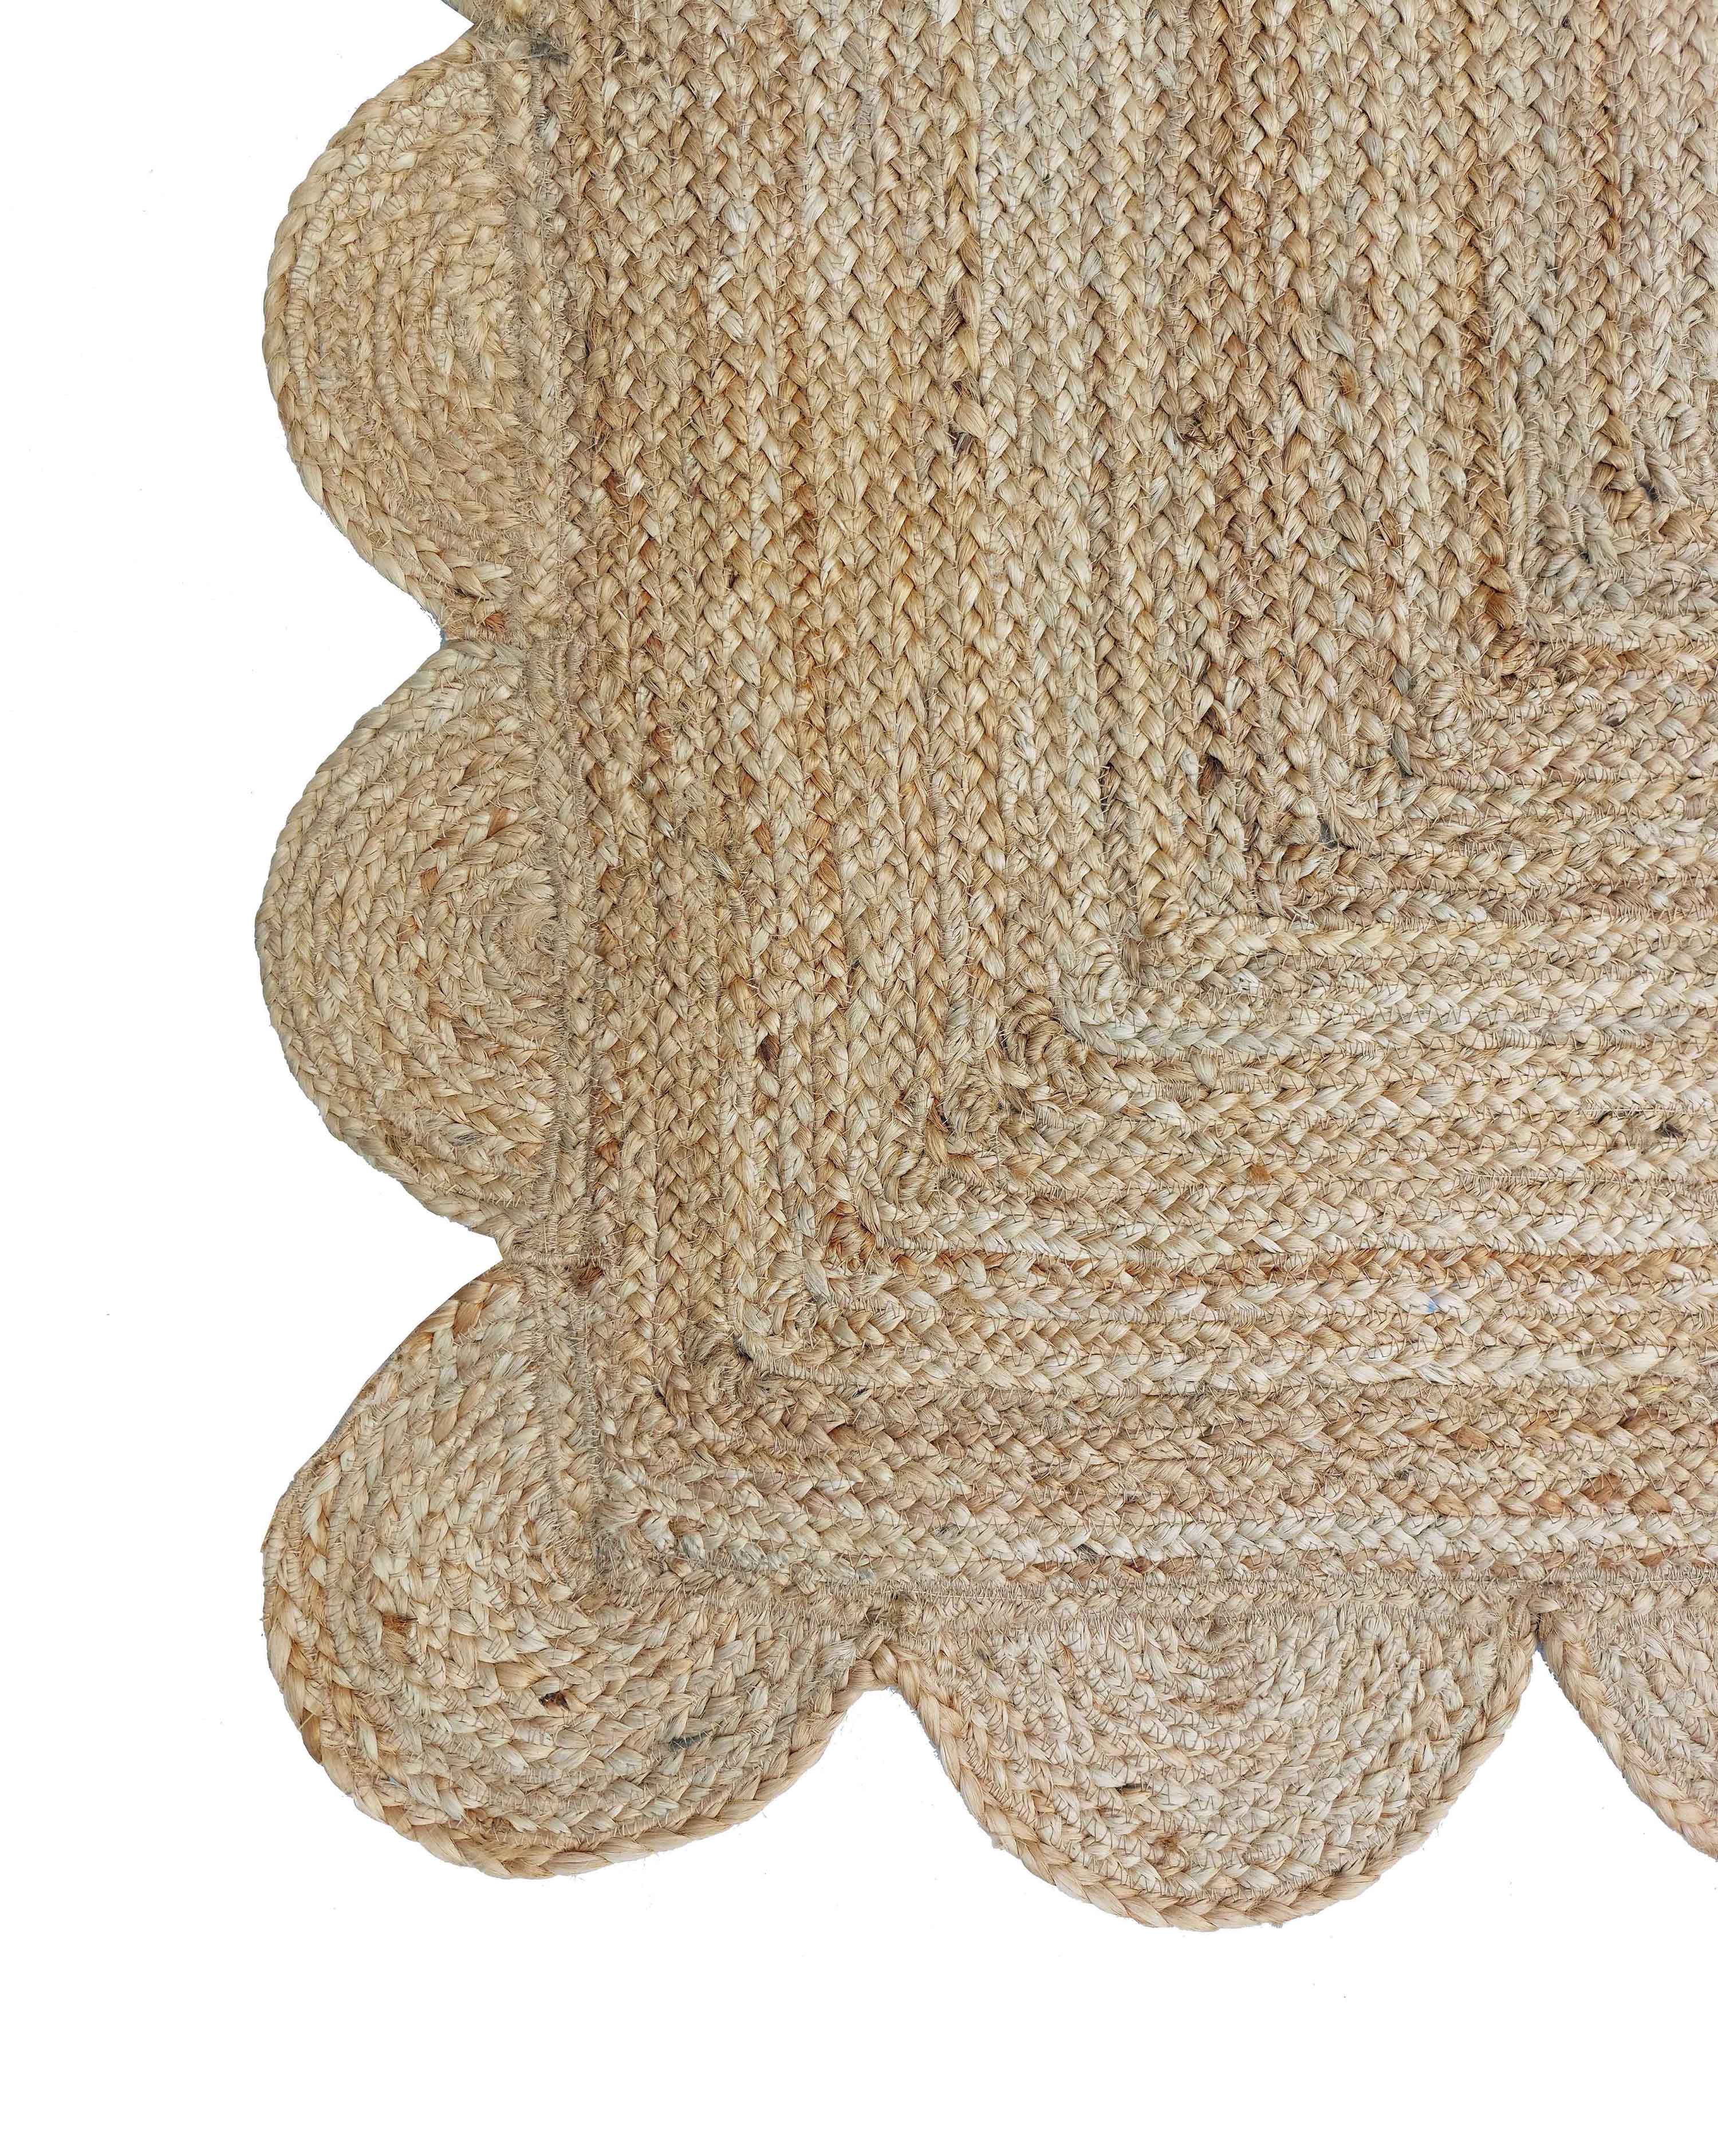 A Scalloped Jute Rug for the Closet — The Grit and Polish